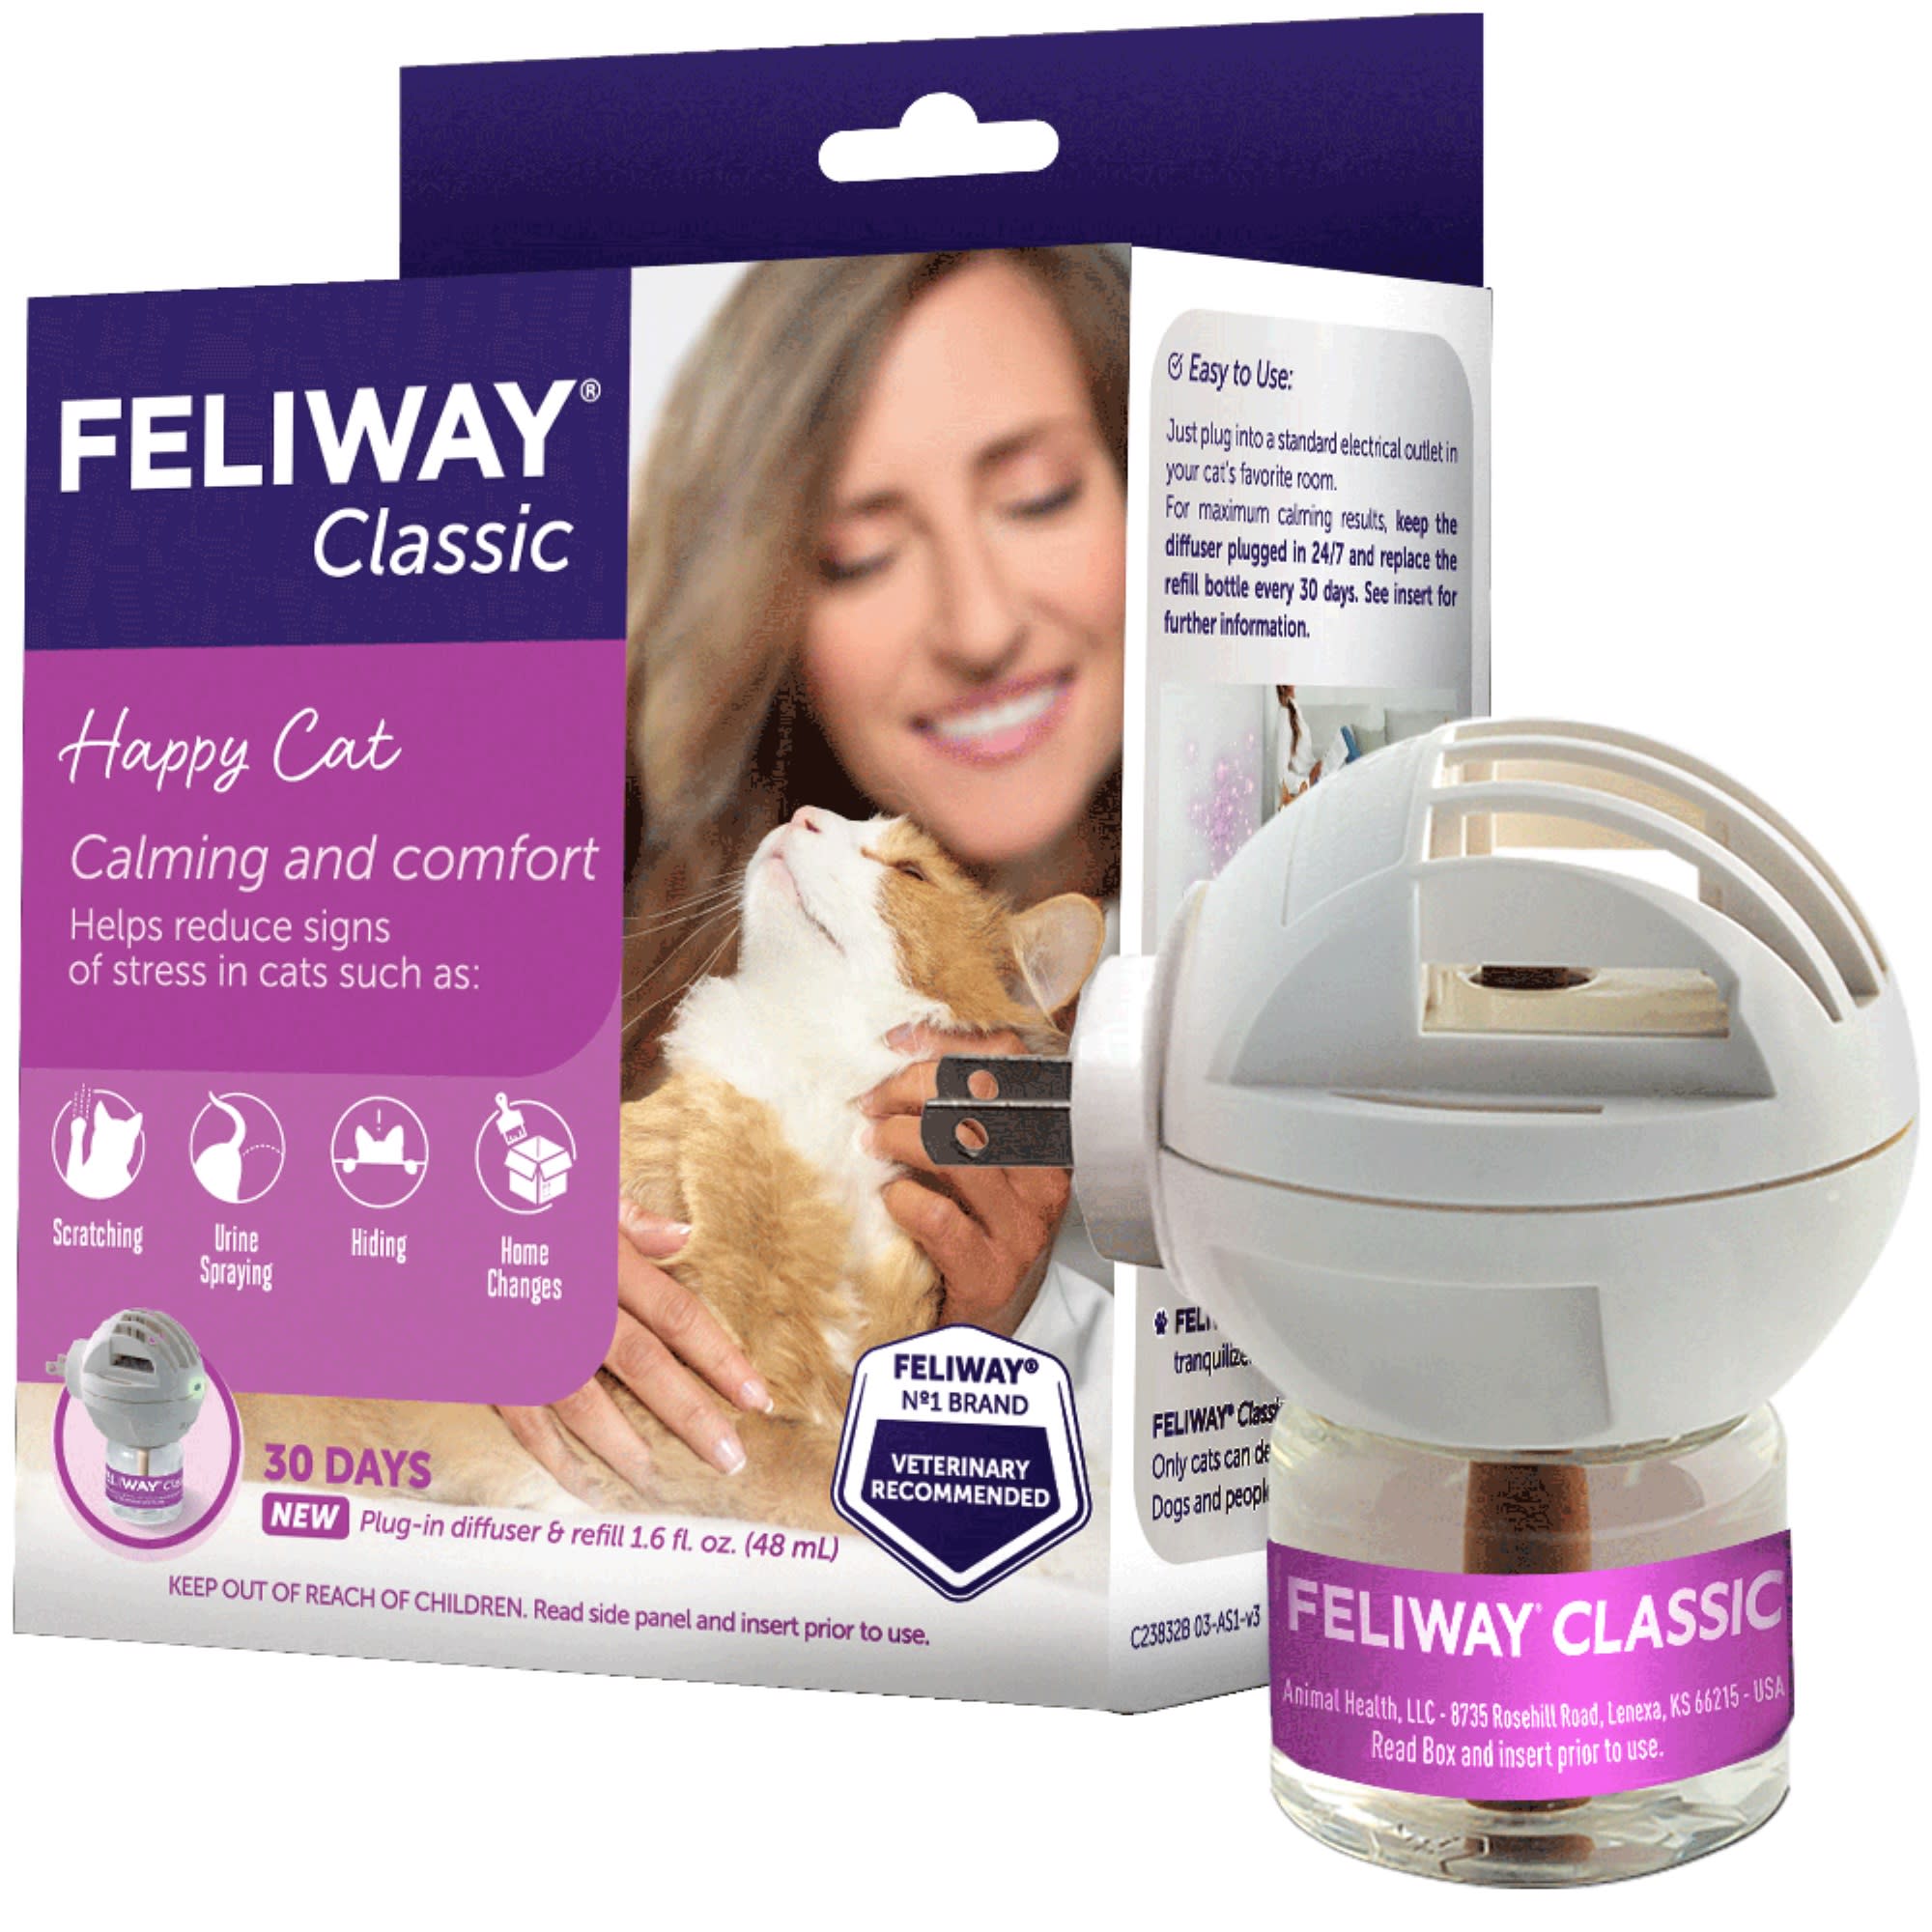 Feliway Classic 30 Day Starter Kit Plug-In Diffuser & Refill For Cat, 48 Ml. | Petco